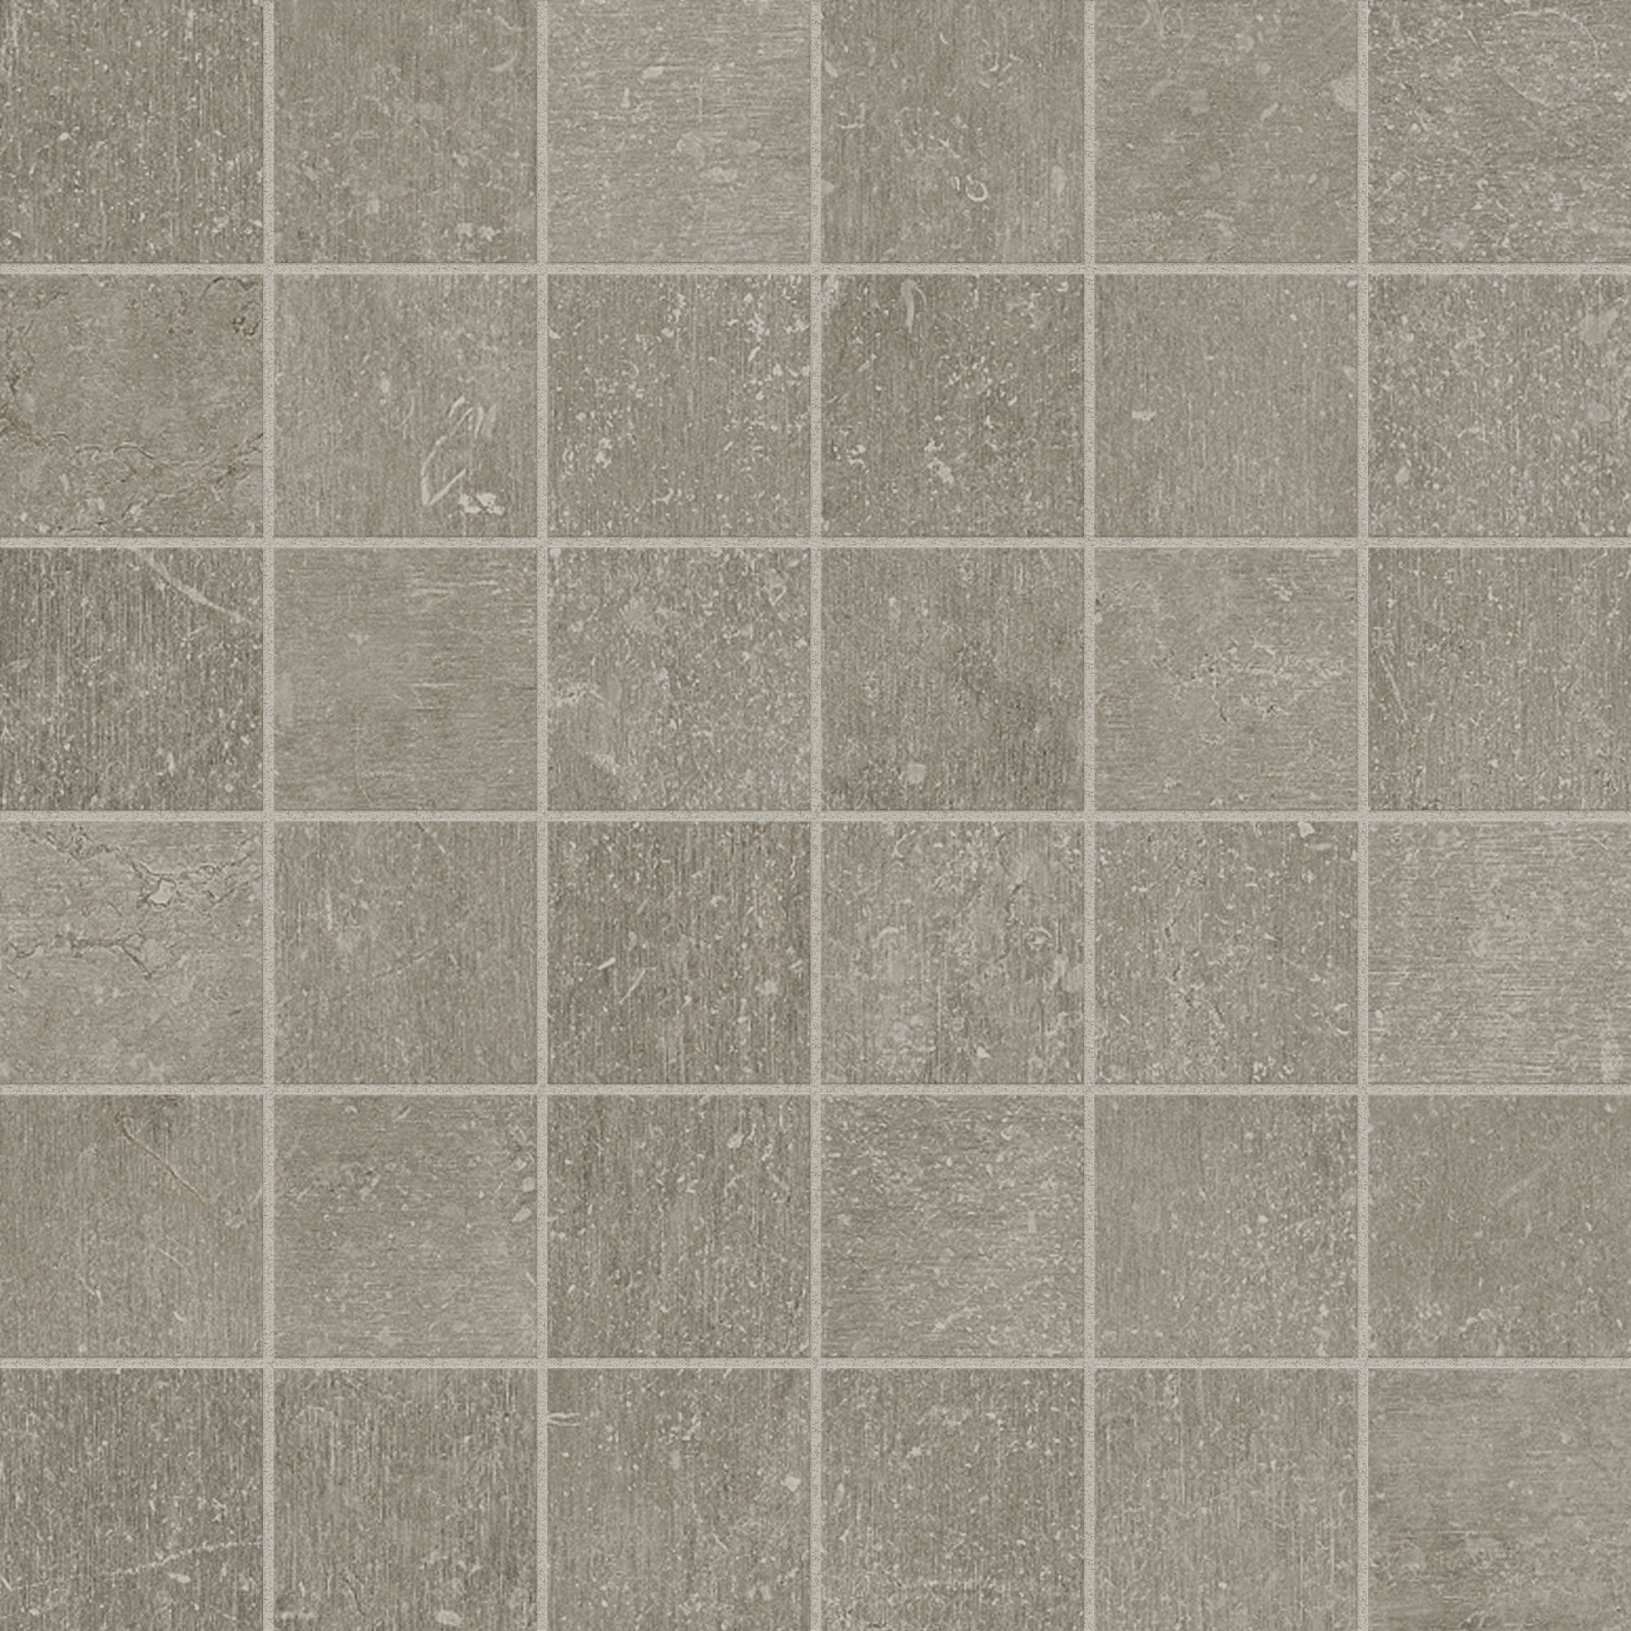 clay straight stack 2x2-inch pattern glazed porcelain mosaic from nexus anatolia collection distributed by surface group international matte finish straight edge edge mesh shape